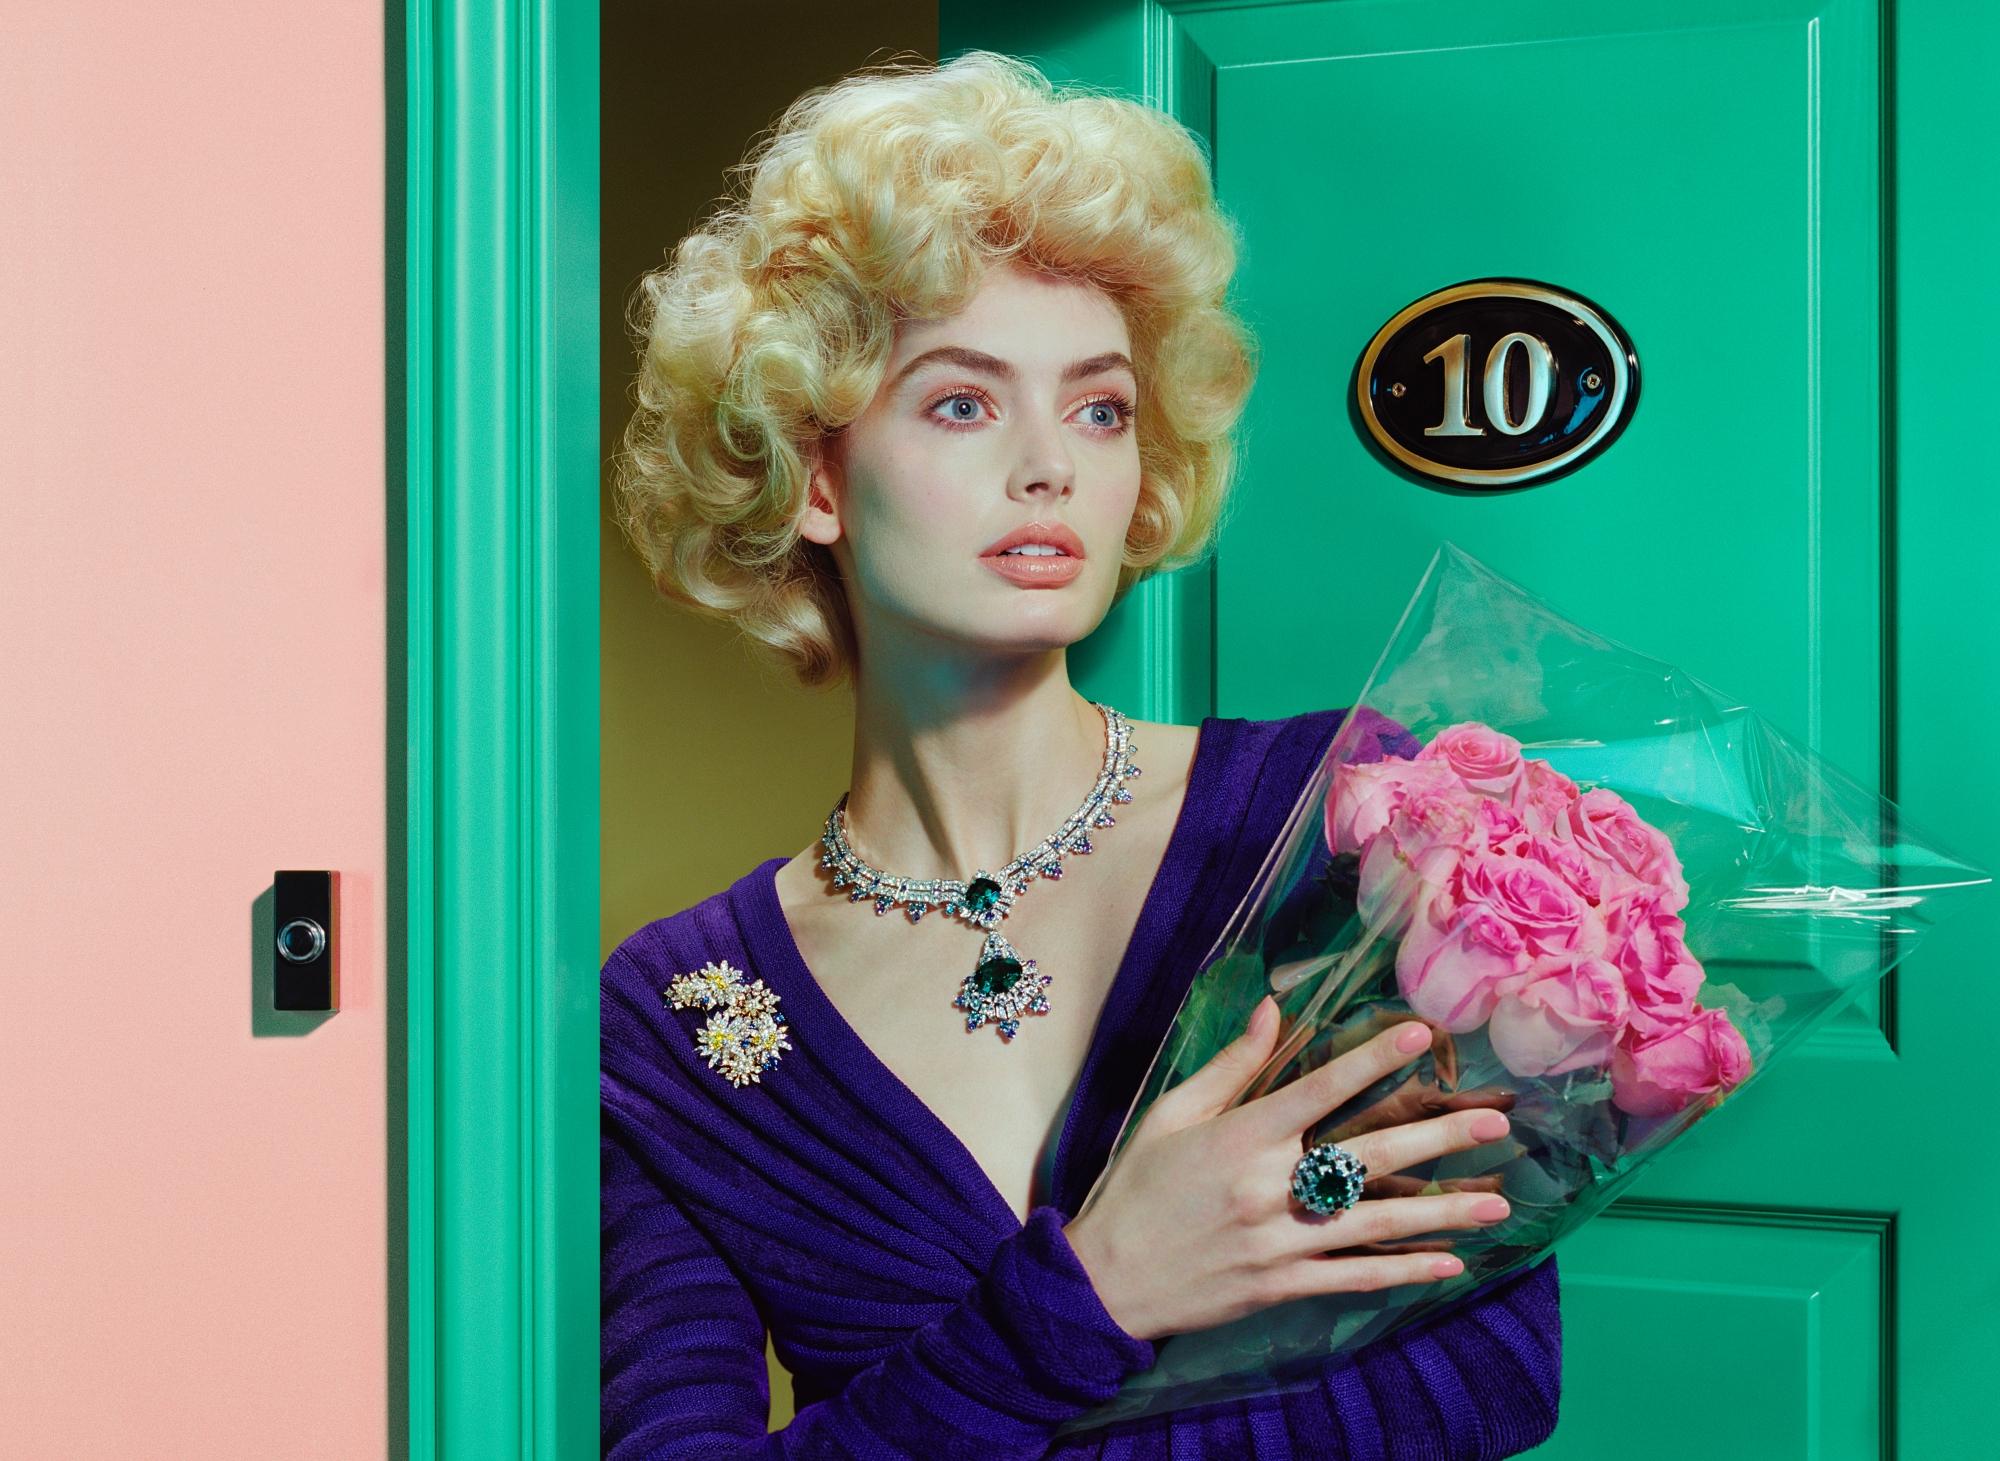 MILES ALDRIDGE (*1964, Great Britain) 
Doors #1, 2023
Screenprint in colours
Sheet 73 x 100 cm (28 3/4 x 39 3/8 in.)
Edition of 15, plus 3 AP; Ed. no. 1/15
Print only


A fiercely original photographer, Miles Aldridge (*1964, Great Britain) is best